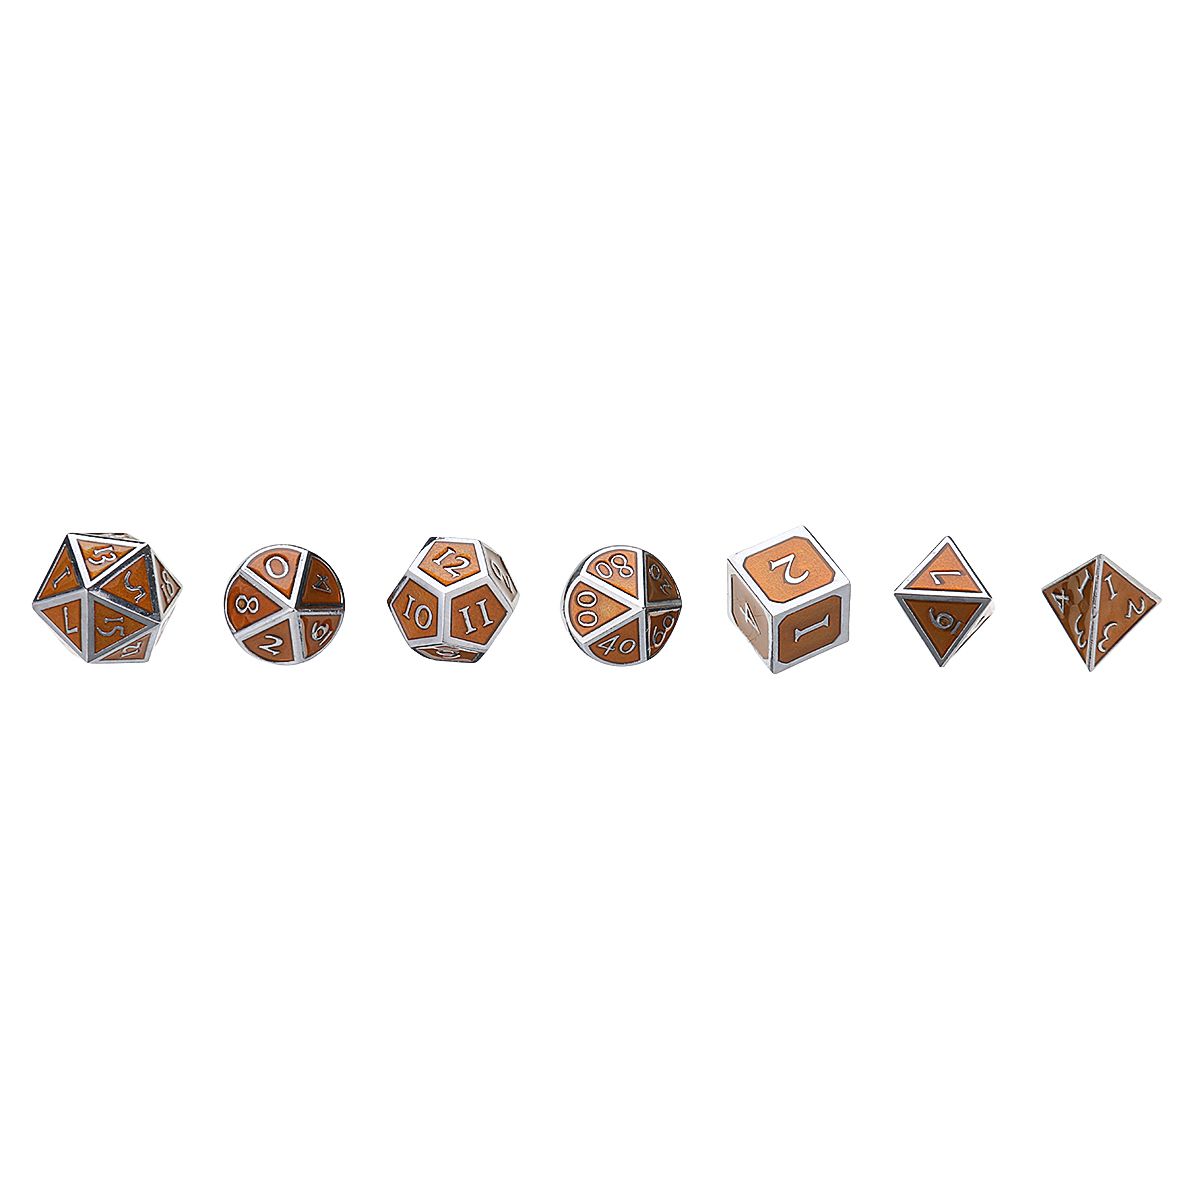 7Pcs-Antique-Metal-Polyhedral-Dices-With-Bag-Copper-Color-For-Dungeons-Dragons-Game-1446543